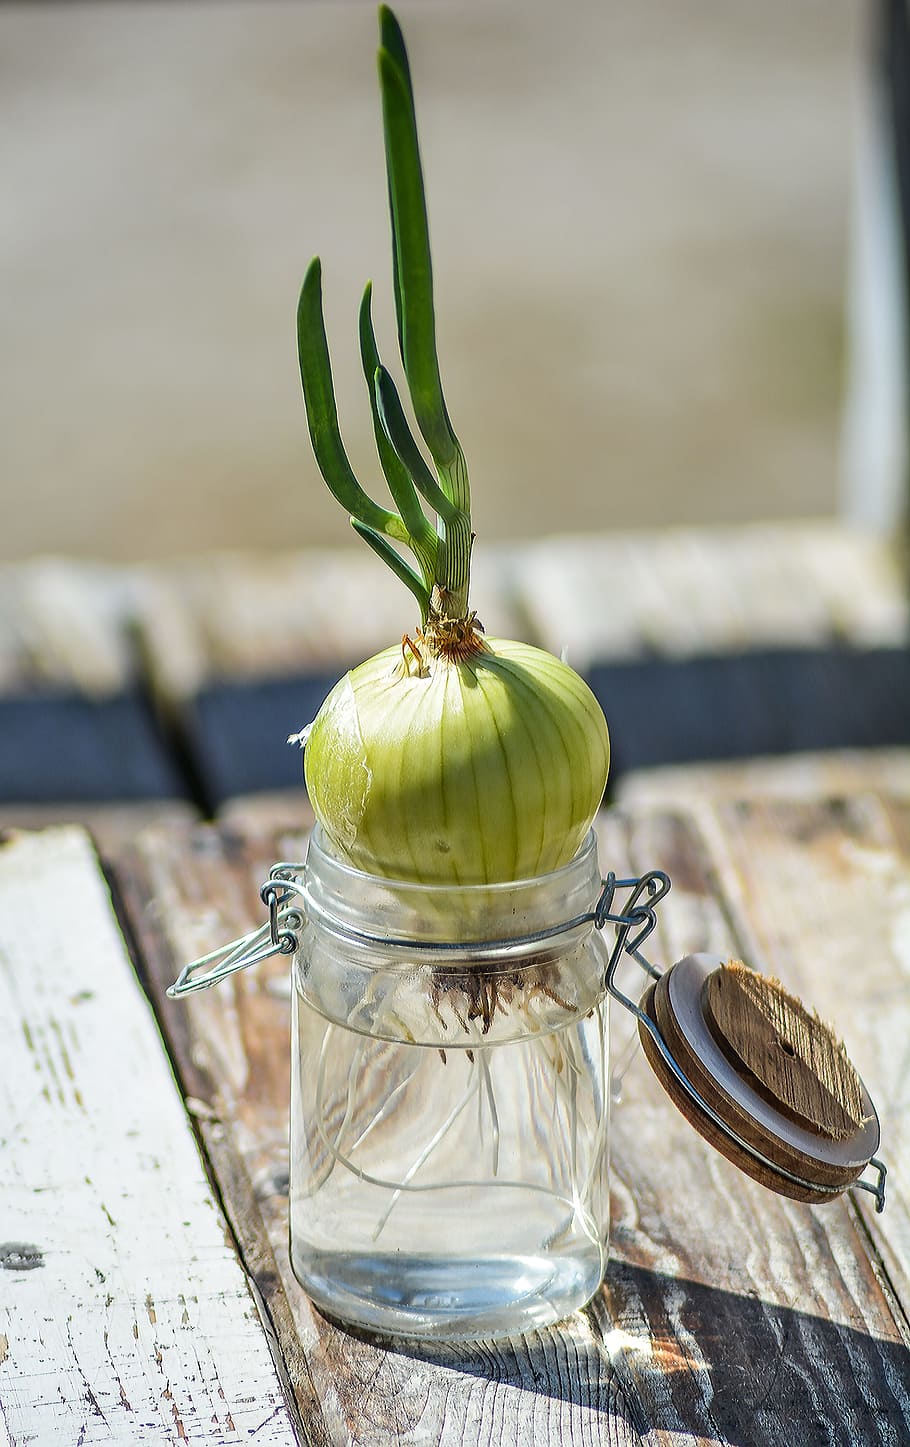 Onion, Chives, Roots, Green, Food, green, food, vegetable, summer, blooming, healthy